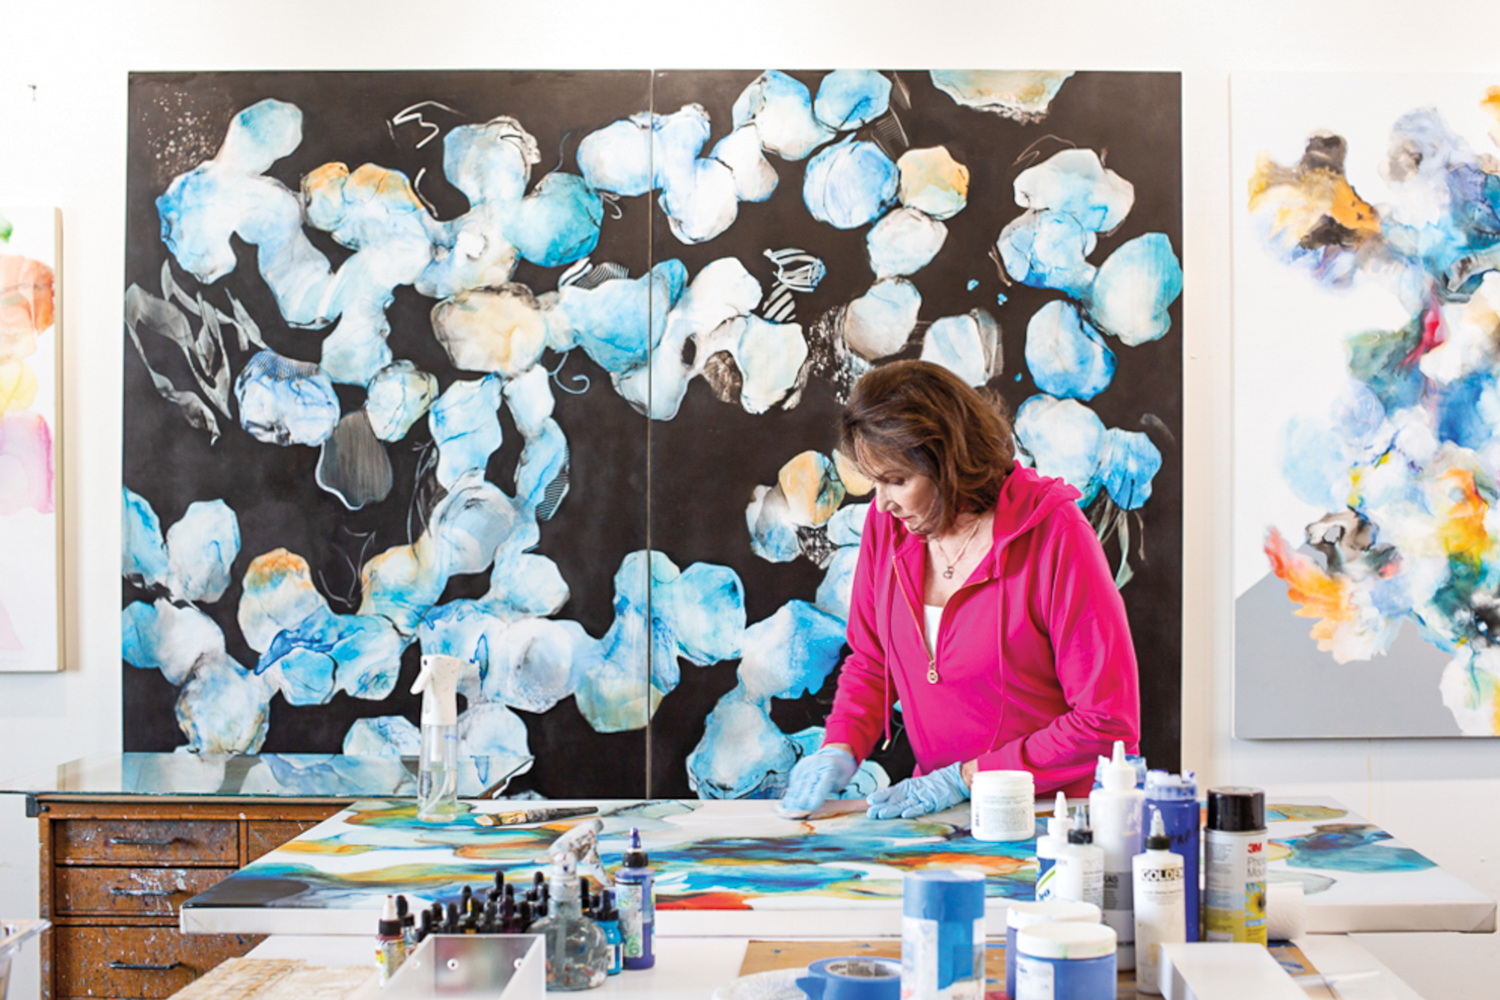 artist working in her studio with a large abstract painting in background